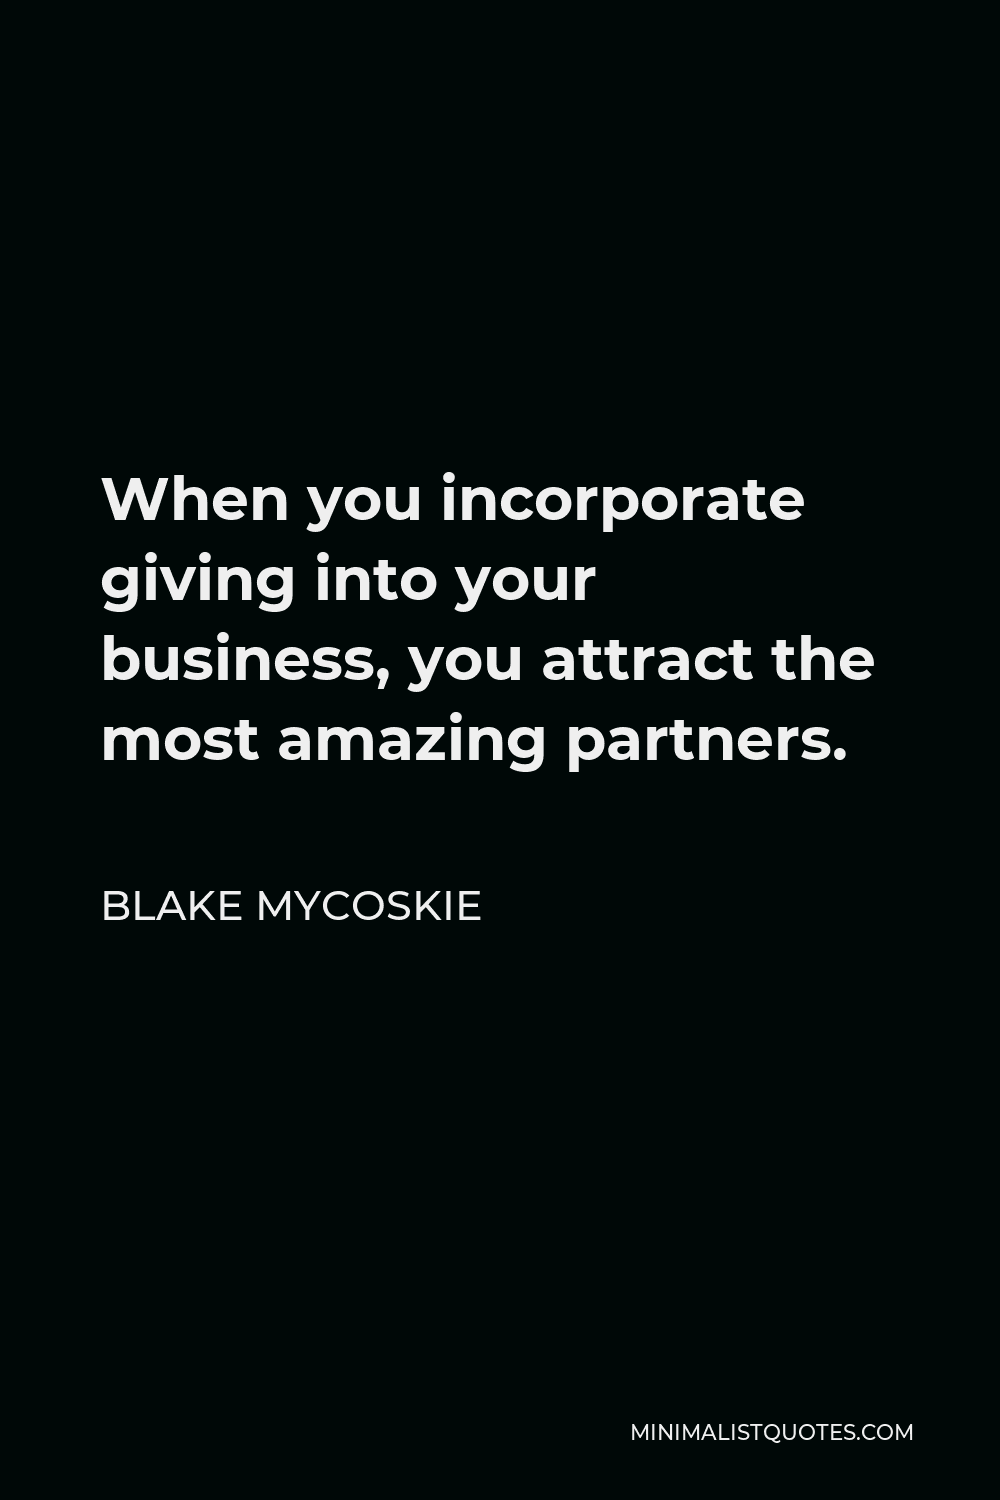 Blake Mycoskie Quote - When you incorporate giving into your business, you attract the most amazing partners.